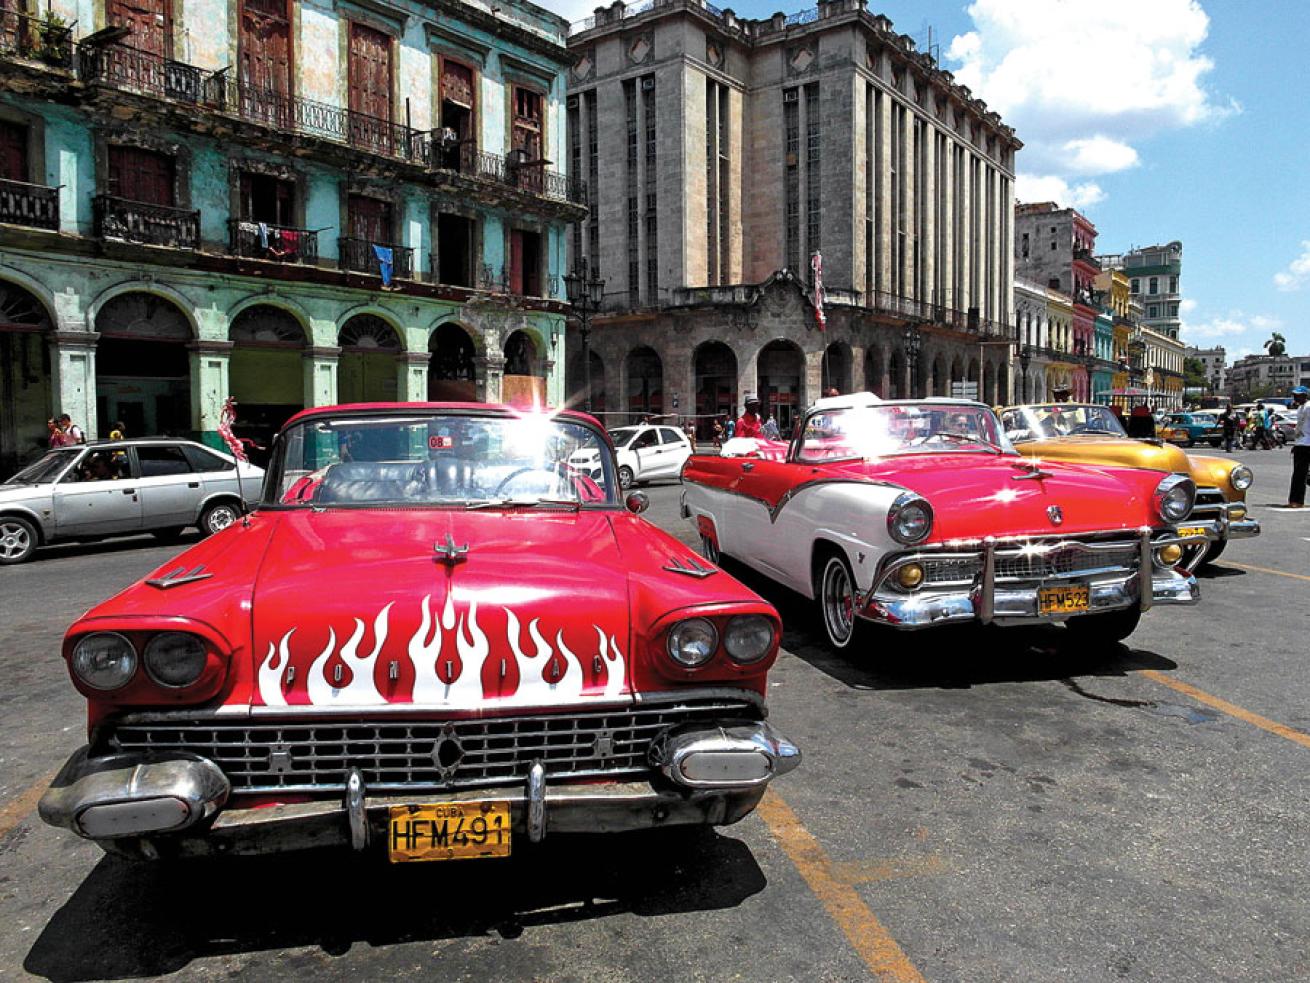 Classic American cars line the streets in Havana